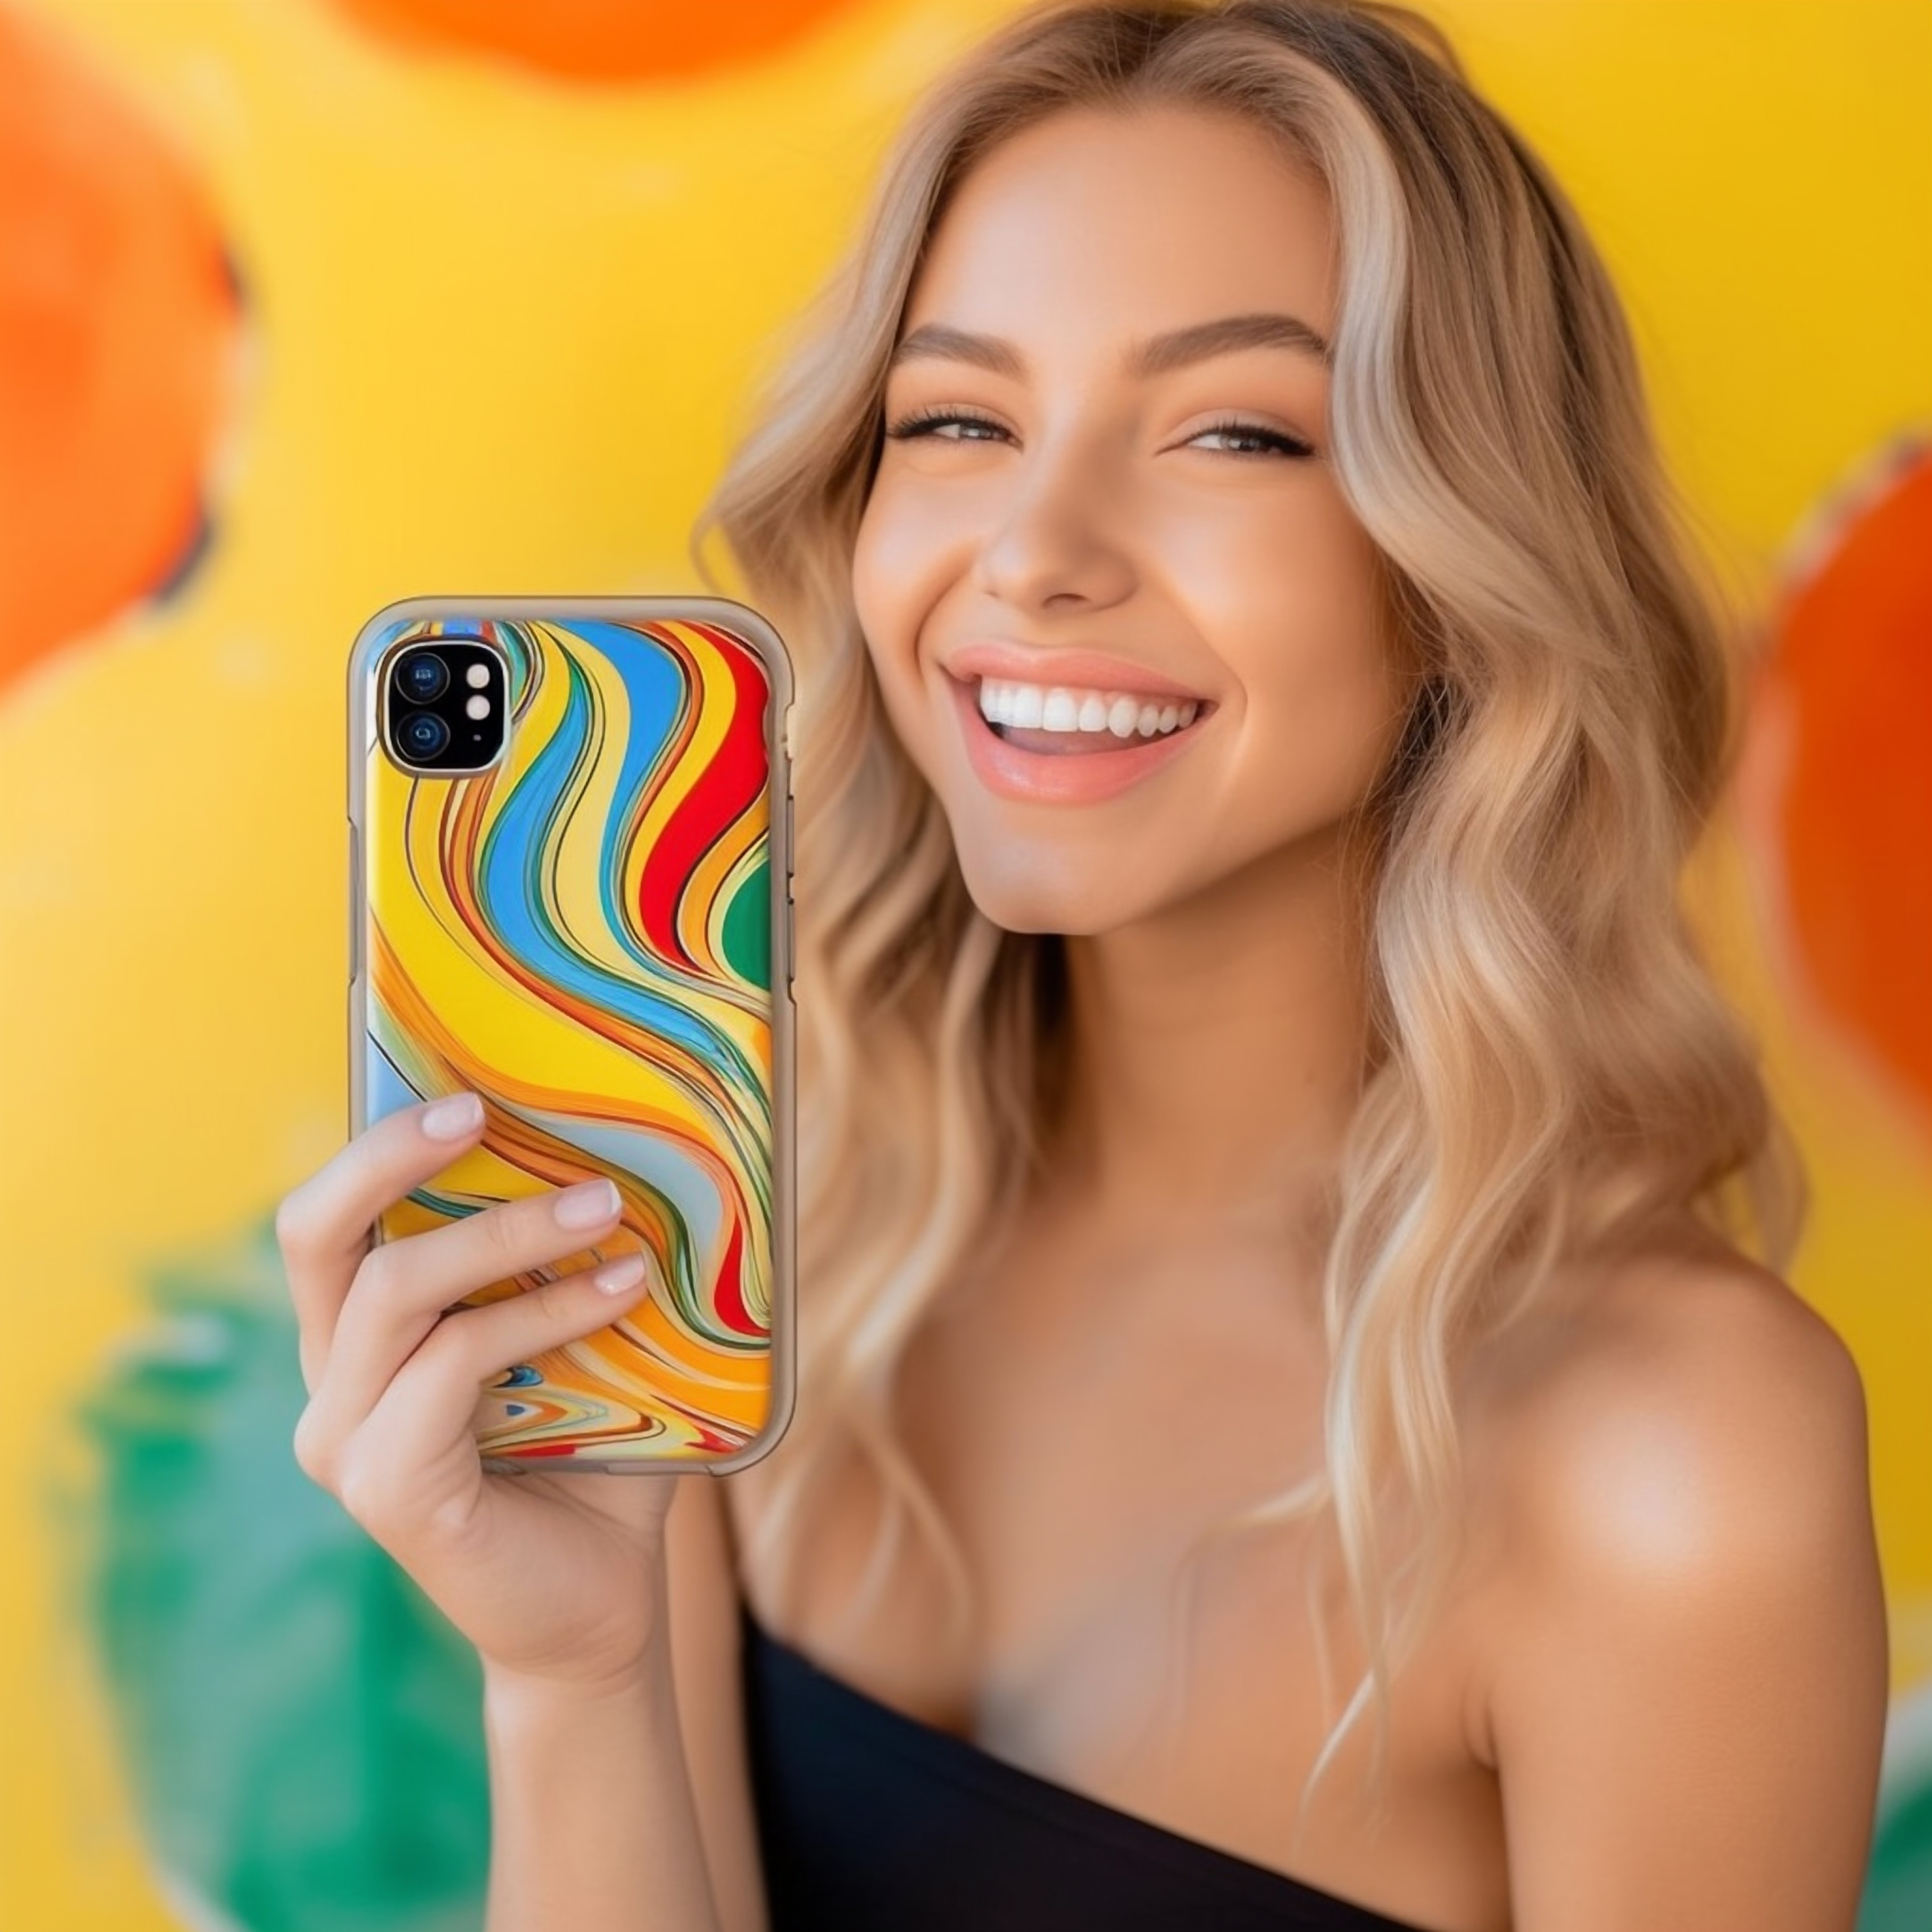 tinywow_BBUser_joyful_girl_holding_colorful_colored_iPhone_case_in_the__7cd96610-eceb-4c83-99ef-1c9c17de2ce7_23111769.png